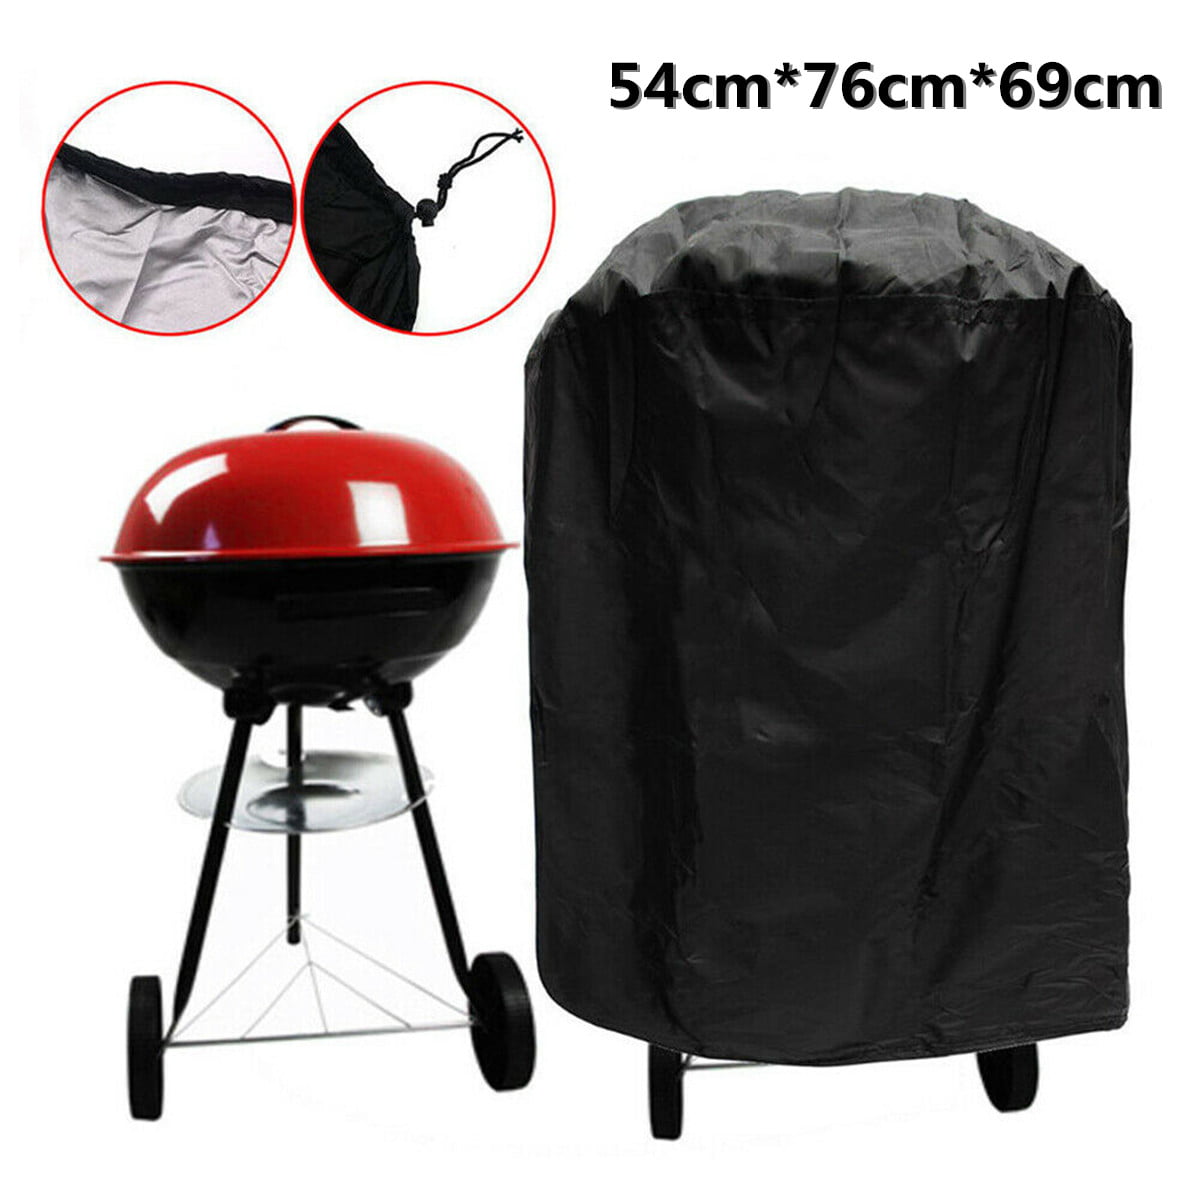 Waterproof BBQ Cover Patio Outdoor Foldable Barbecue Grill Protection 